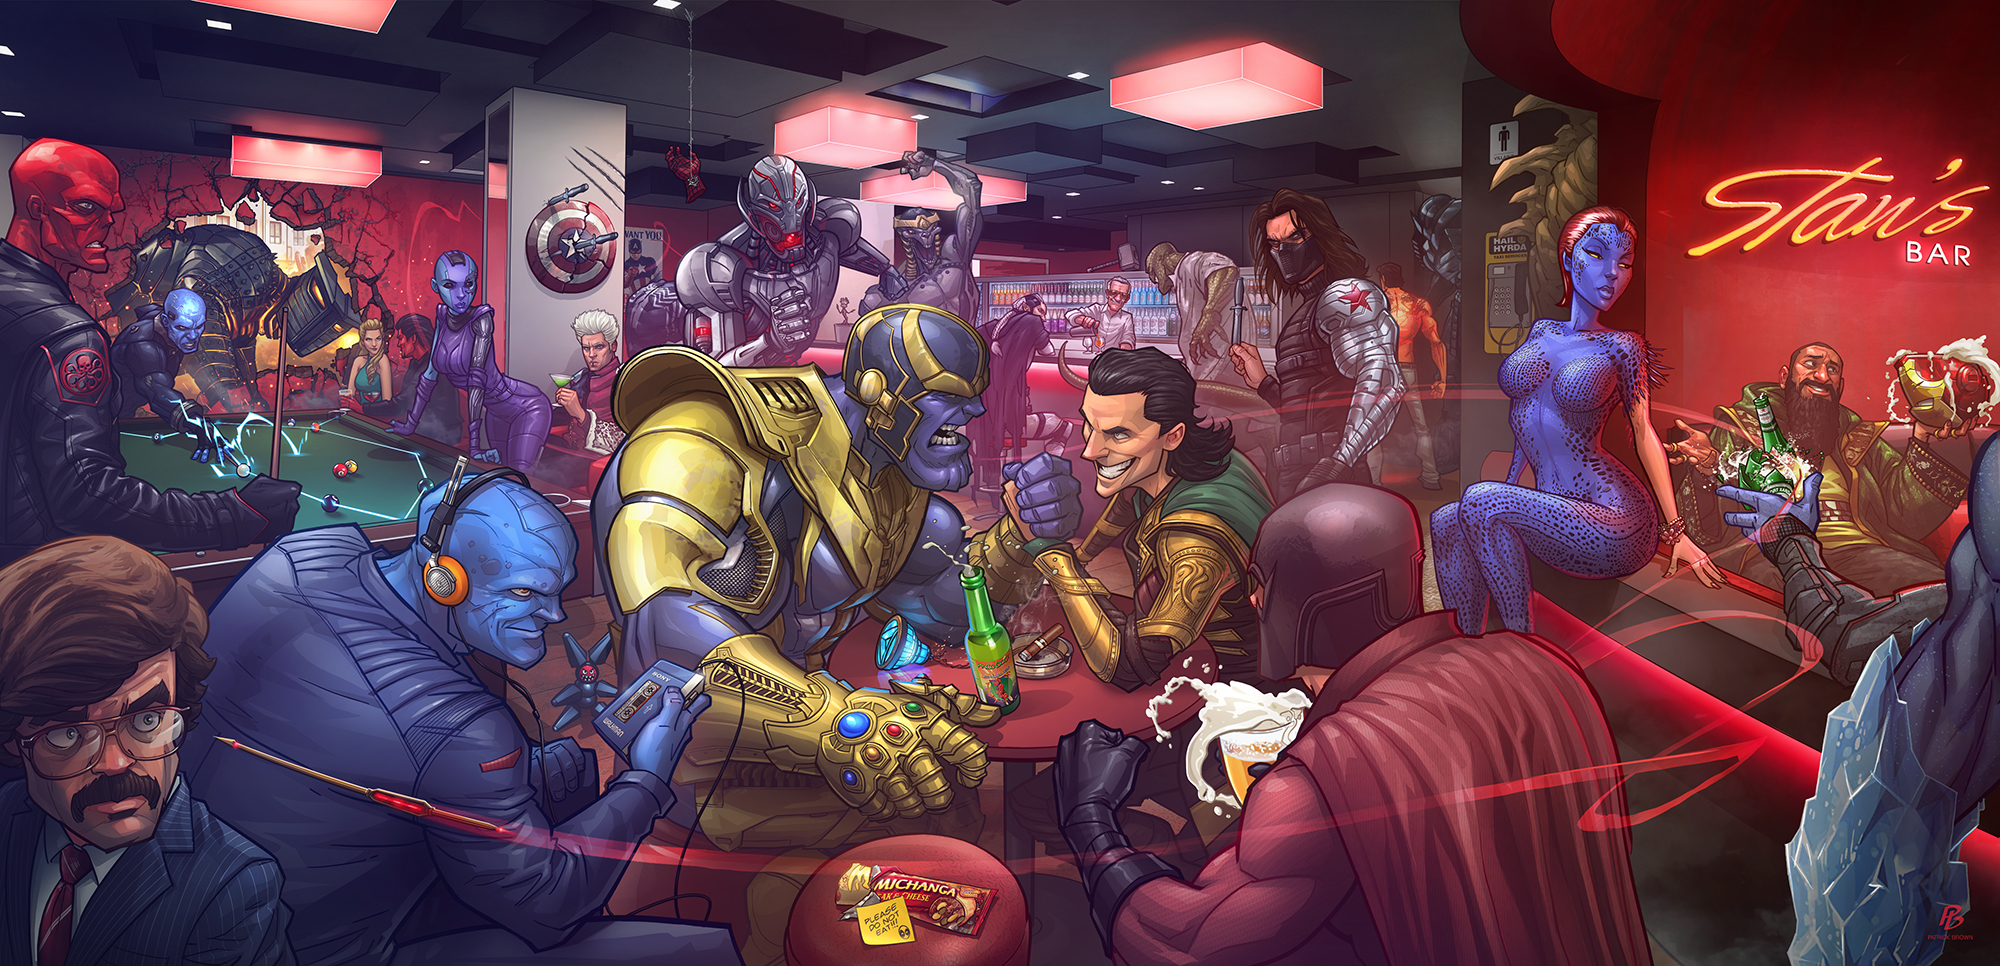 Marvel Villains by PatrickBrown on